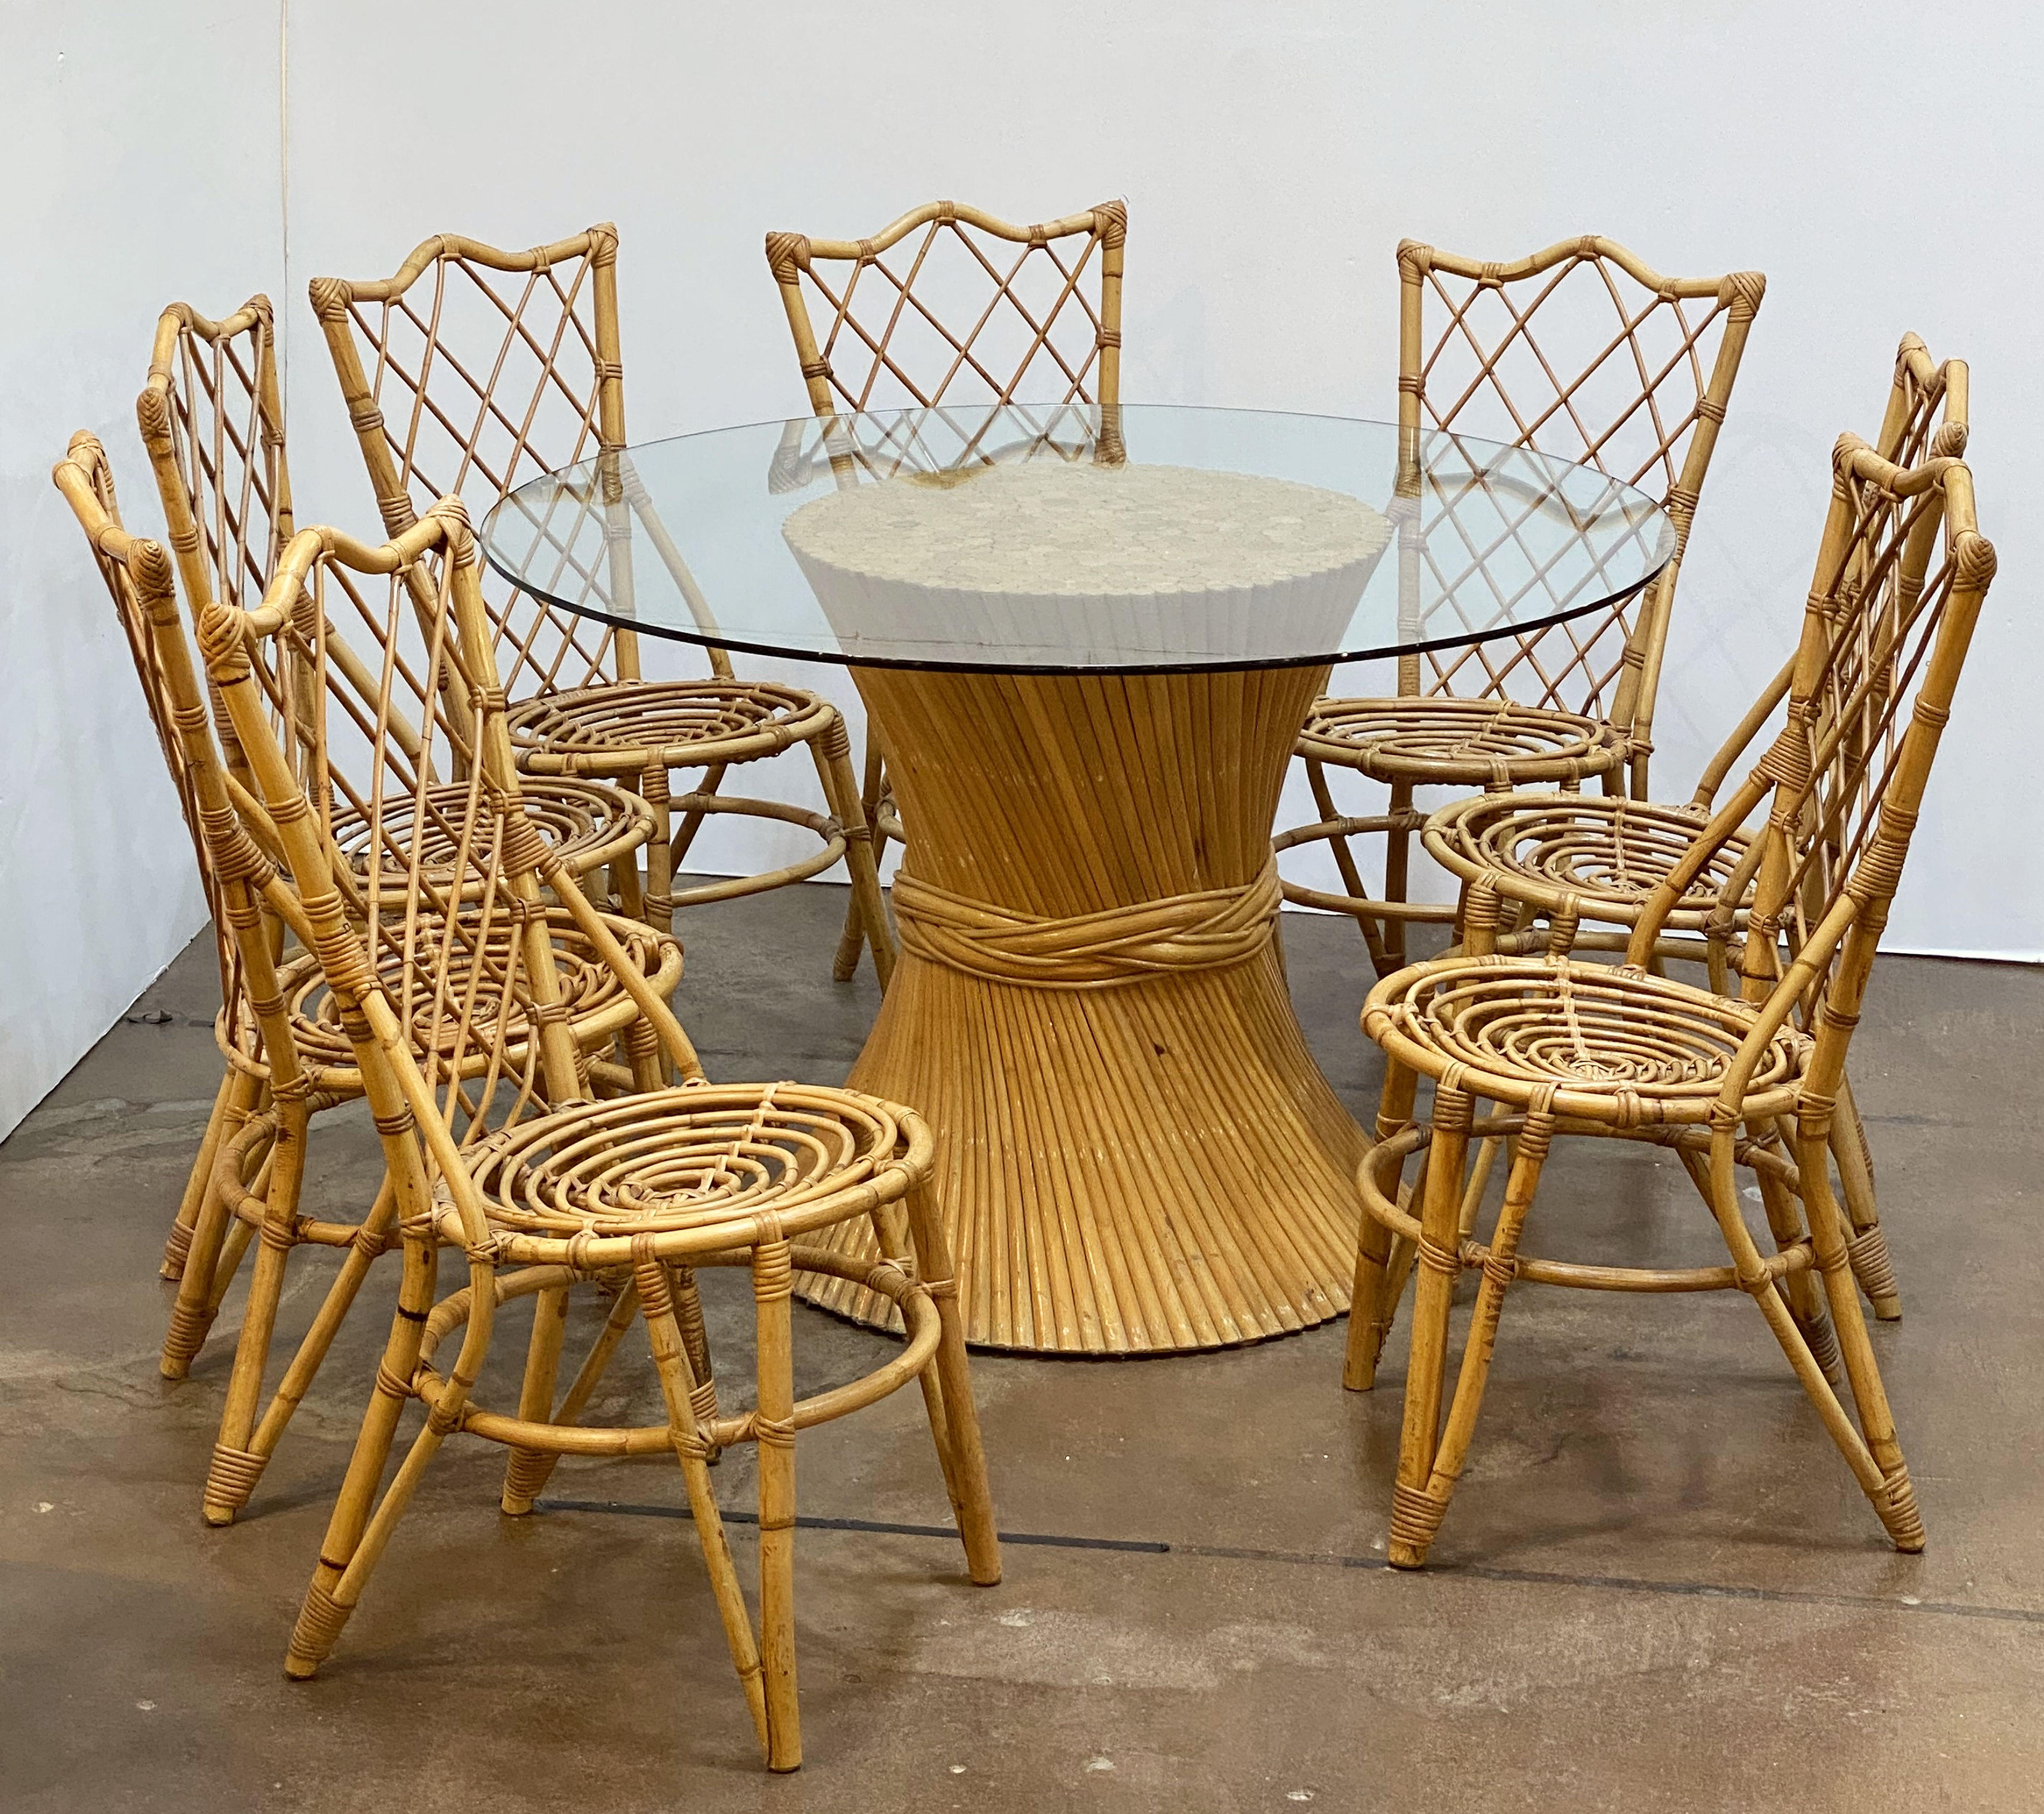 A fine rattan round table or center table, featuring a large circular glass top over a stylish design of spiral bound bundle of rattan, attributed to McGuire Furniture Company.

Dimensions: Height 29 7/8 inches x diameter 47 1/2 inches.

An iconic